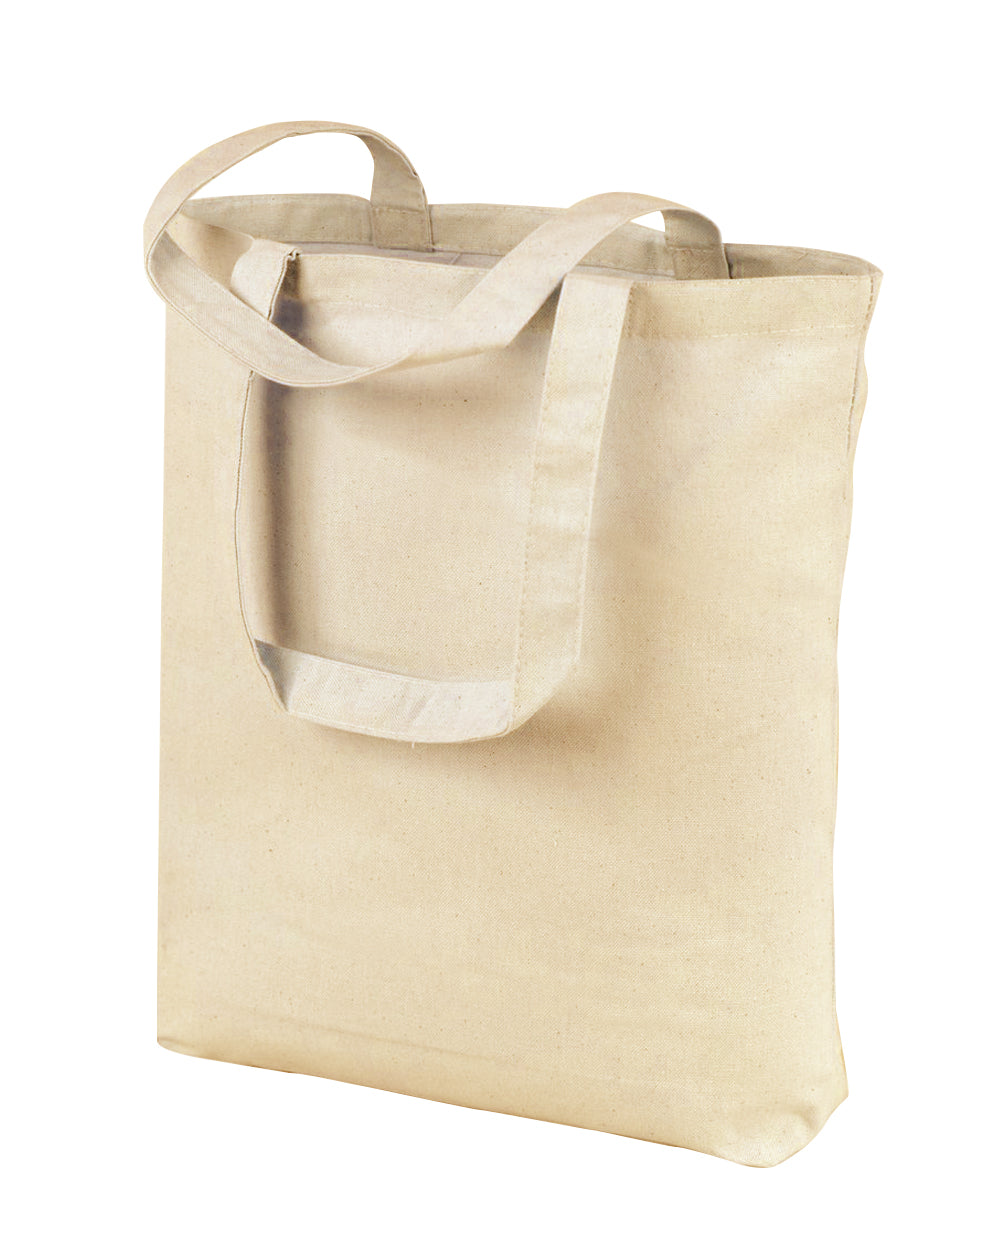 Organic Cotton Grocery Tote Bags